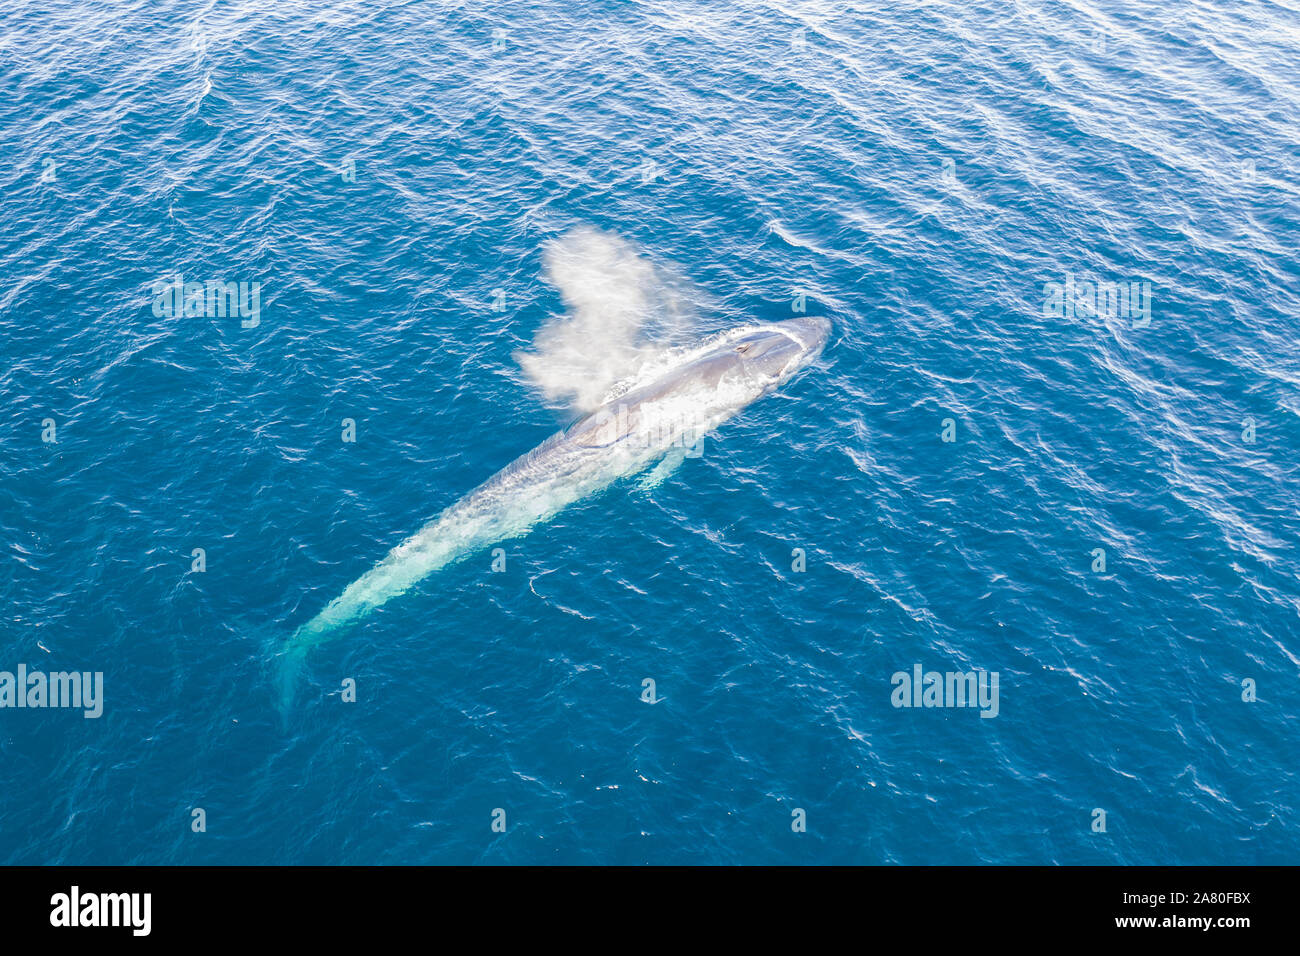 A Pygmy blue whale, Balaenoptera musculus brevicauda, rises to the surface to breathe in Indonesia's Banda Sea. This subspecies reaches over 23 meters. Stock Photo